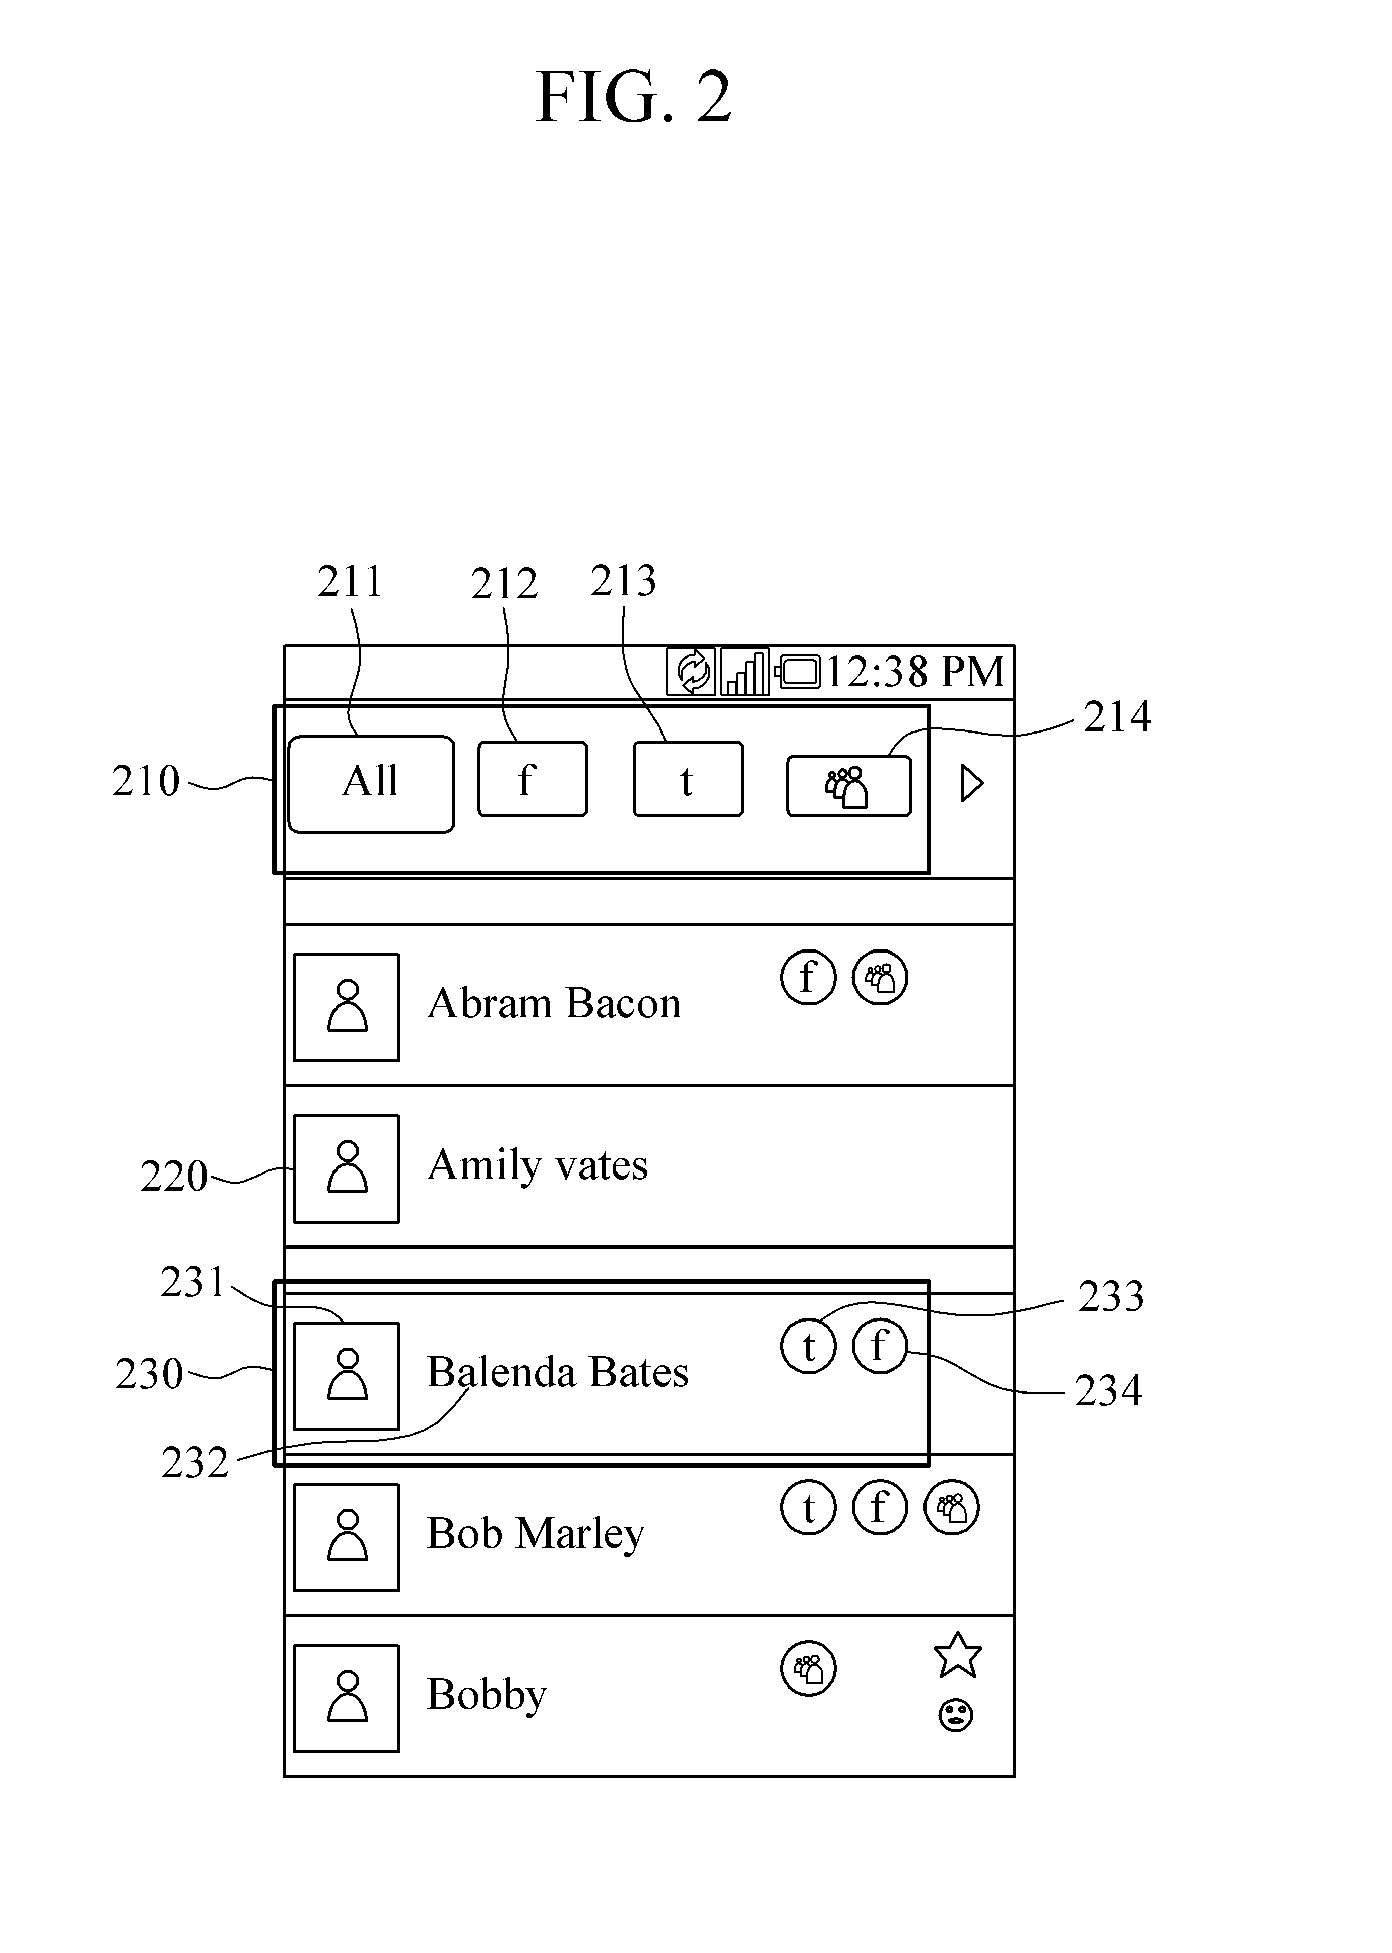 Apparatus and method for providing integrated user information